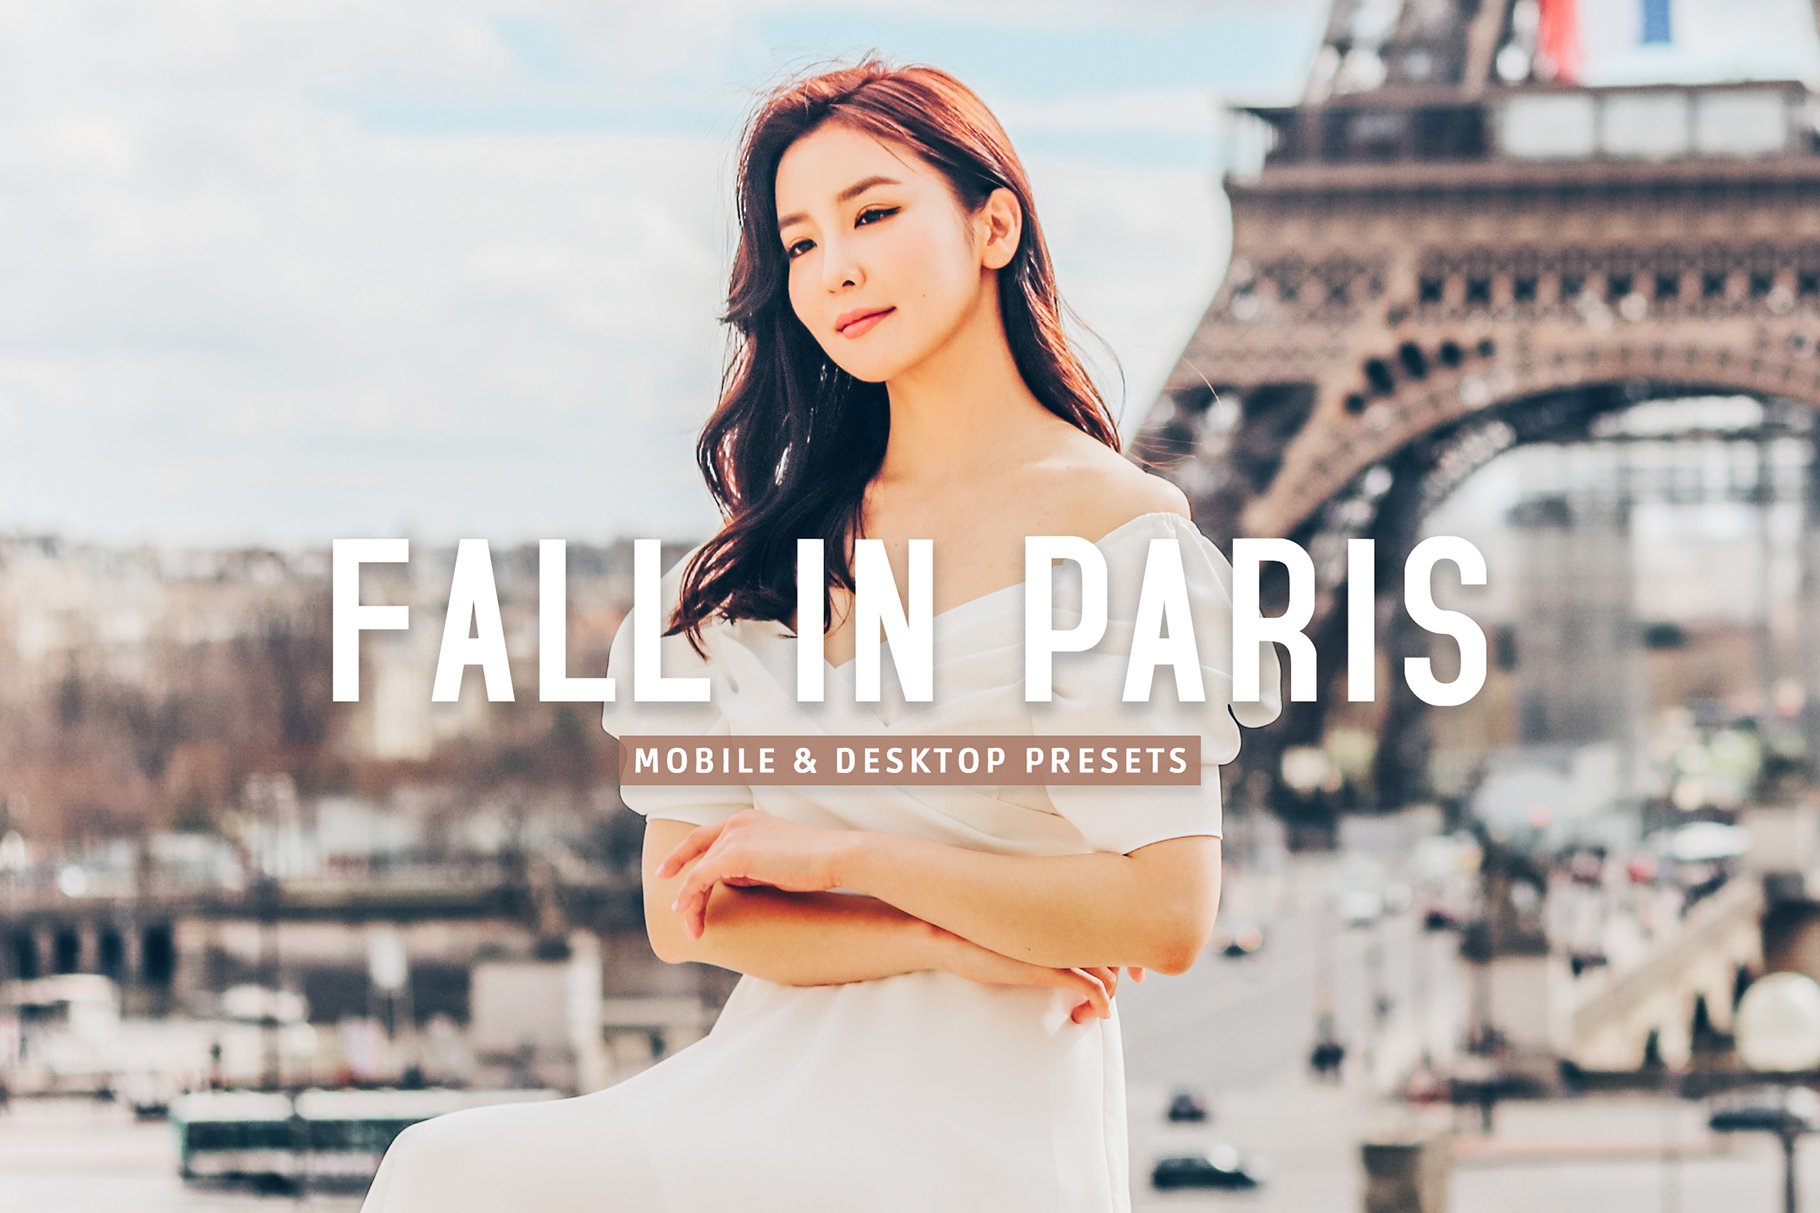 Fall in Paris Pro Lightroom Presetscover image.